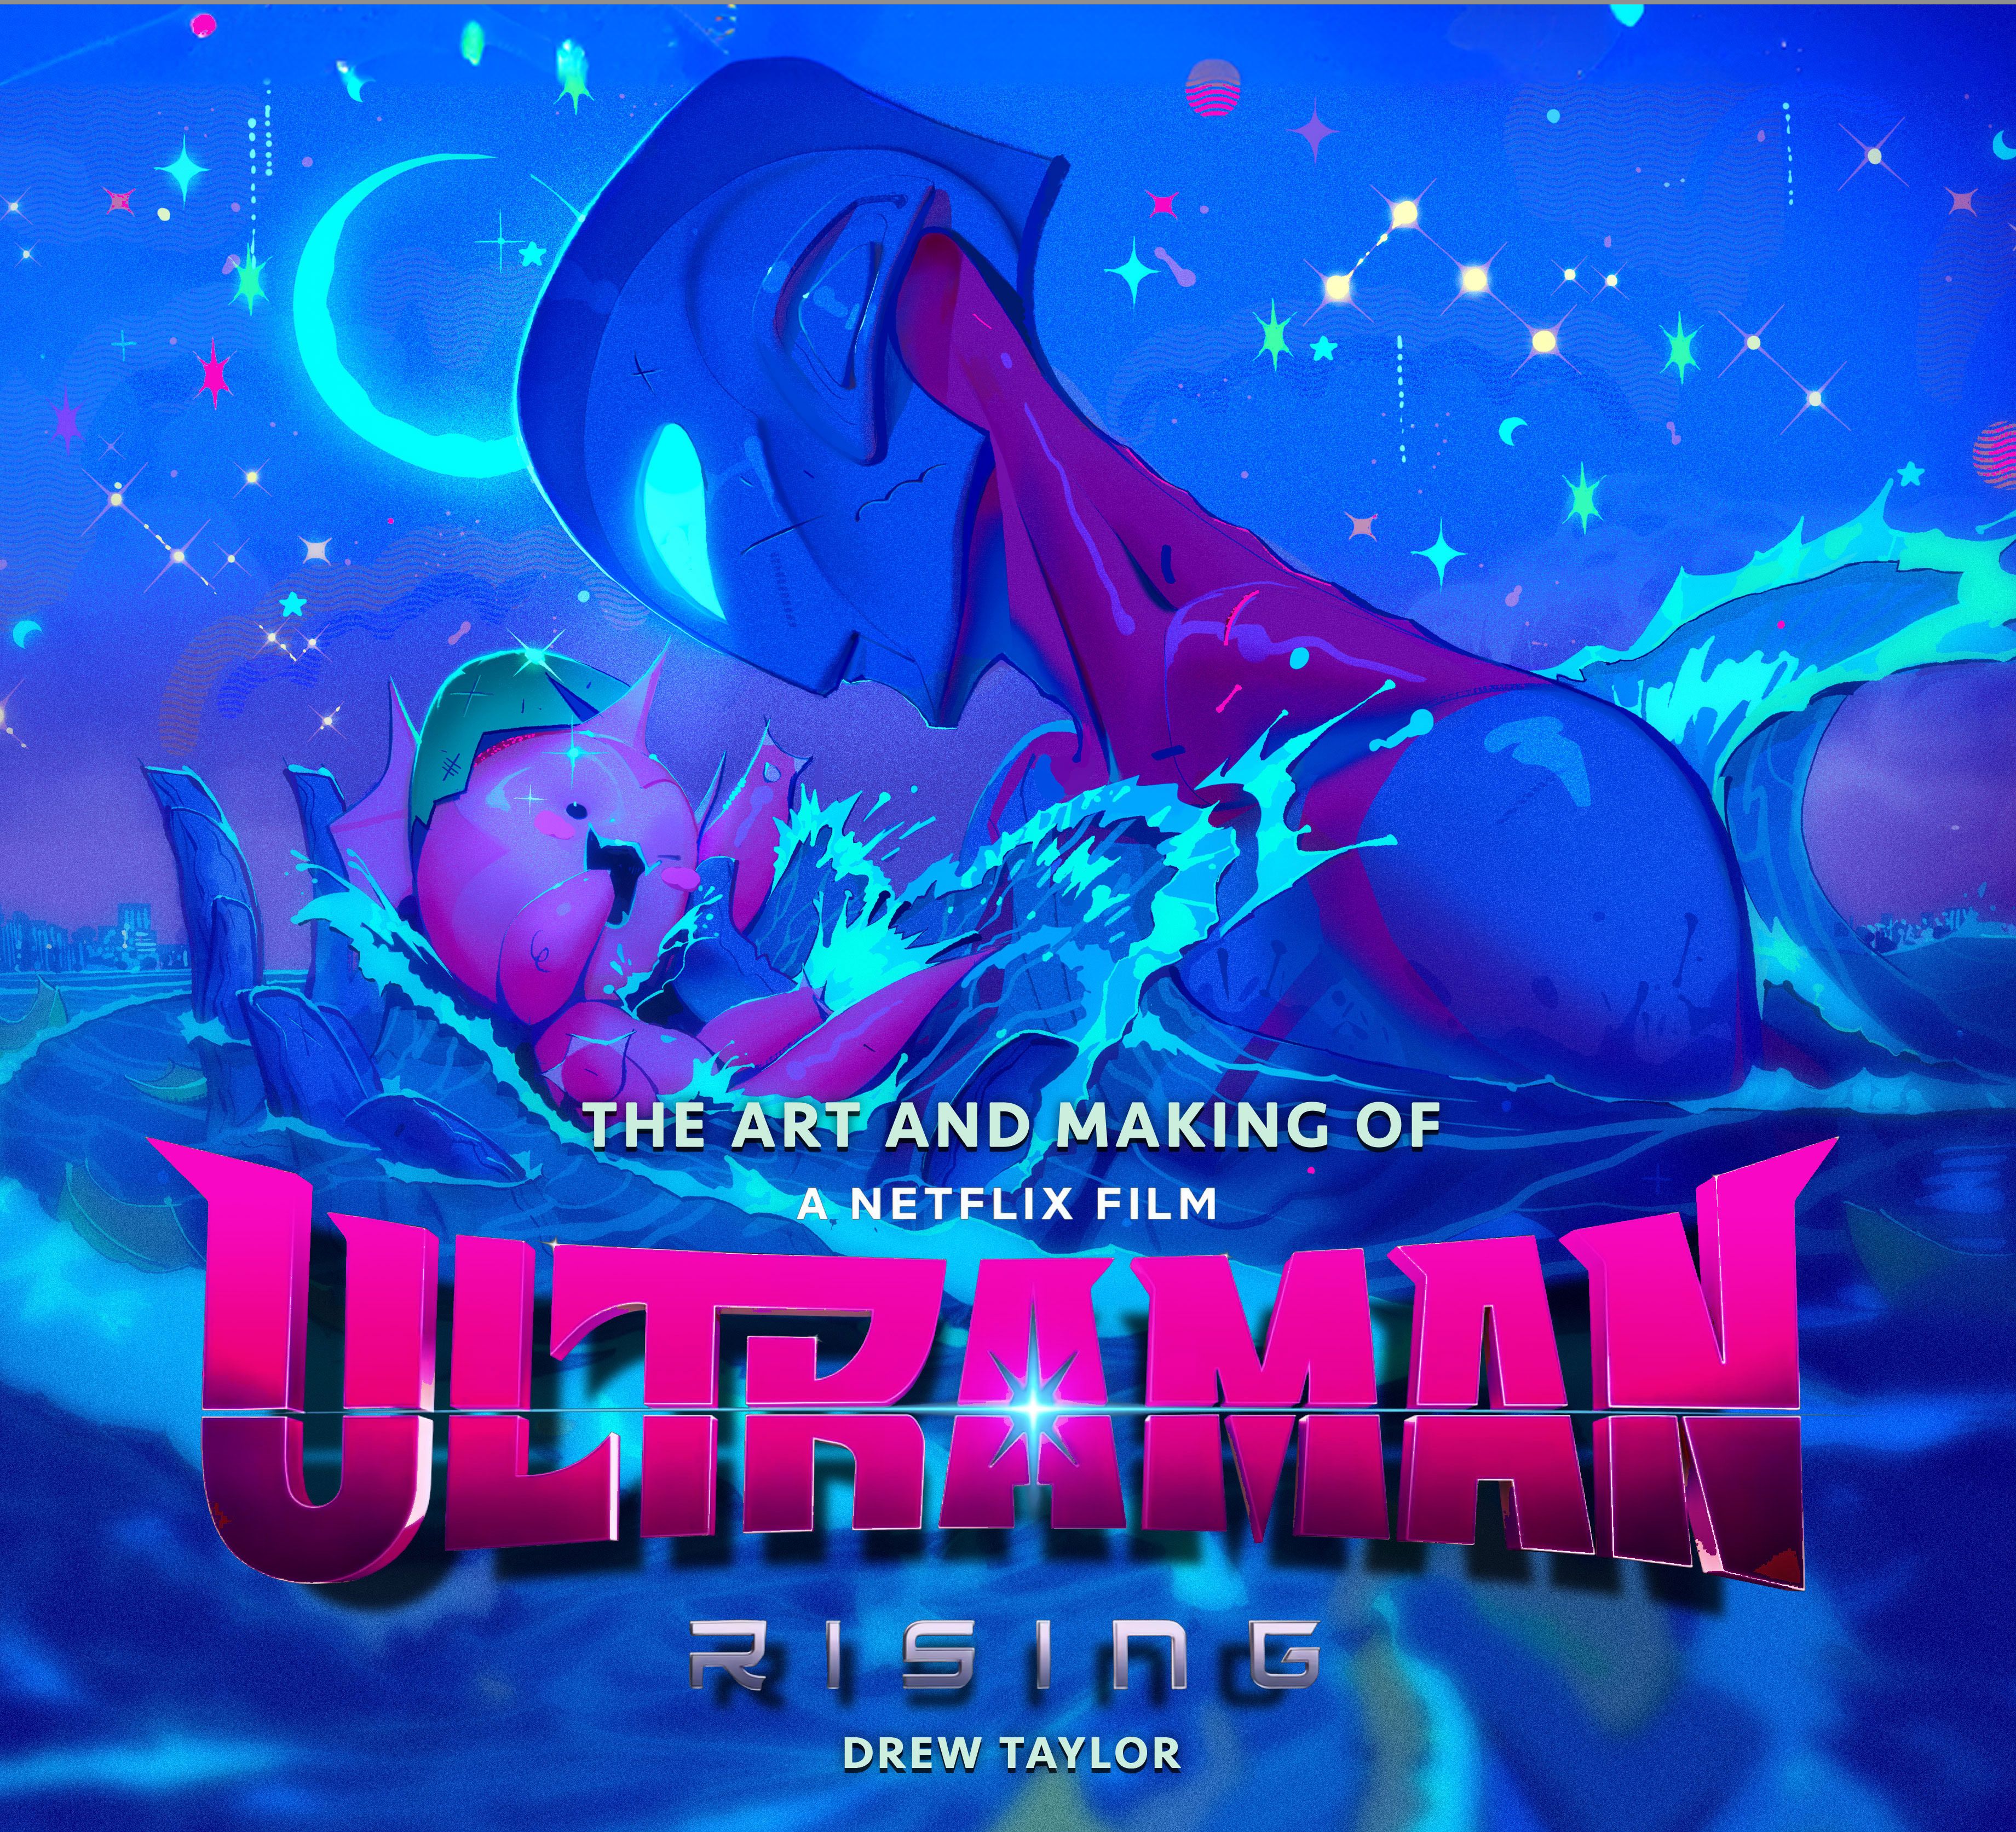 Ultraman: Rising – The Art And Making Of Book Details The Creation Of The New Movie